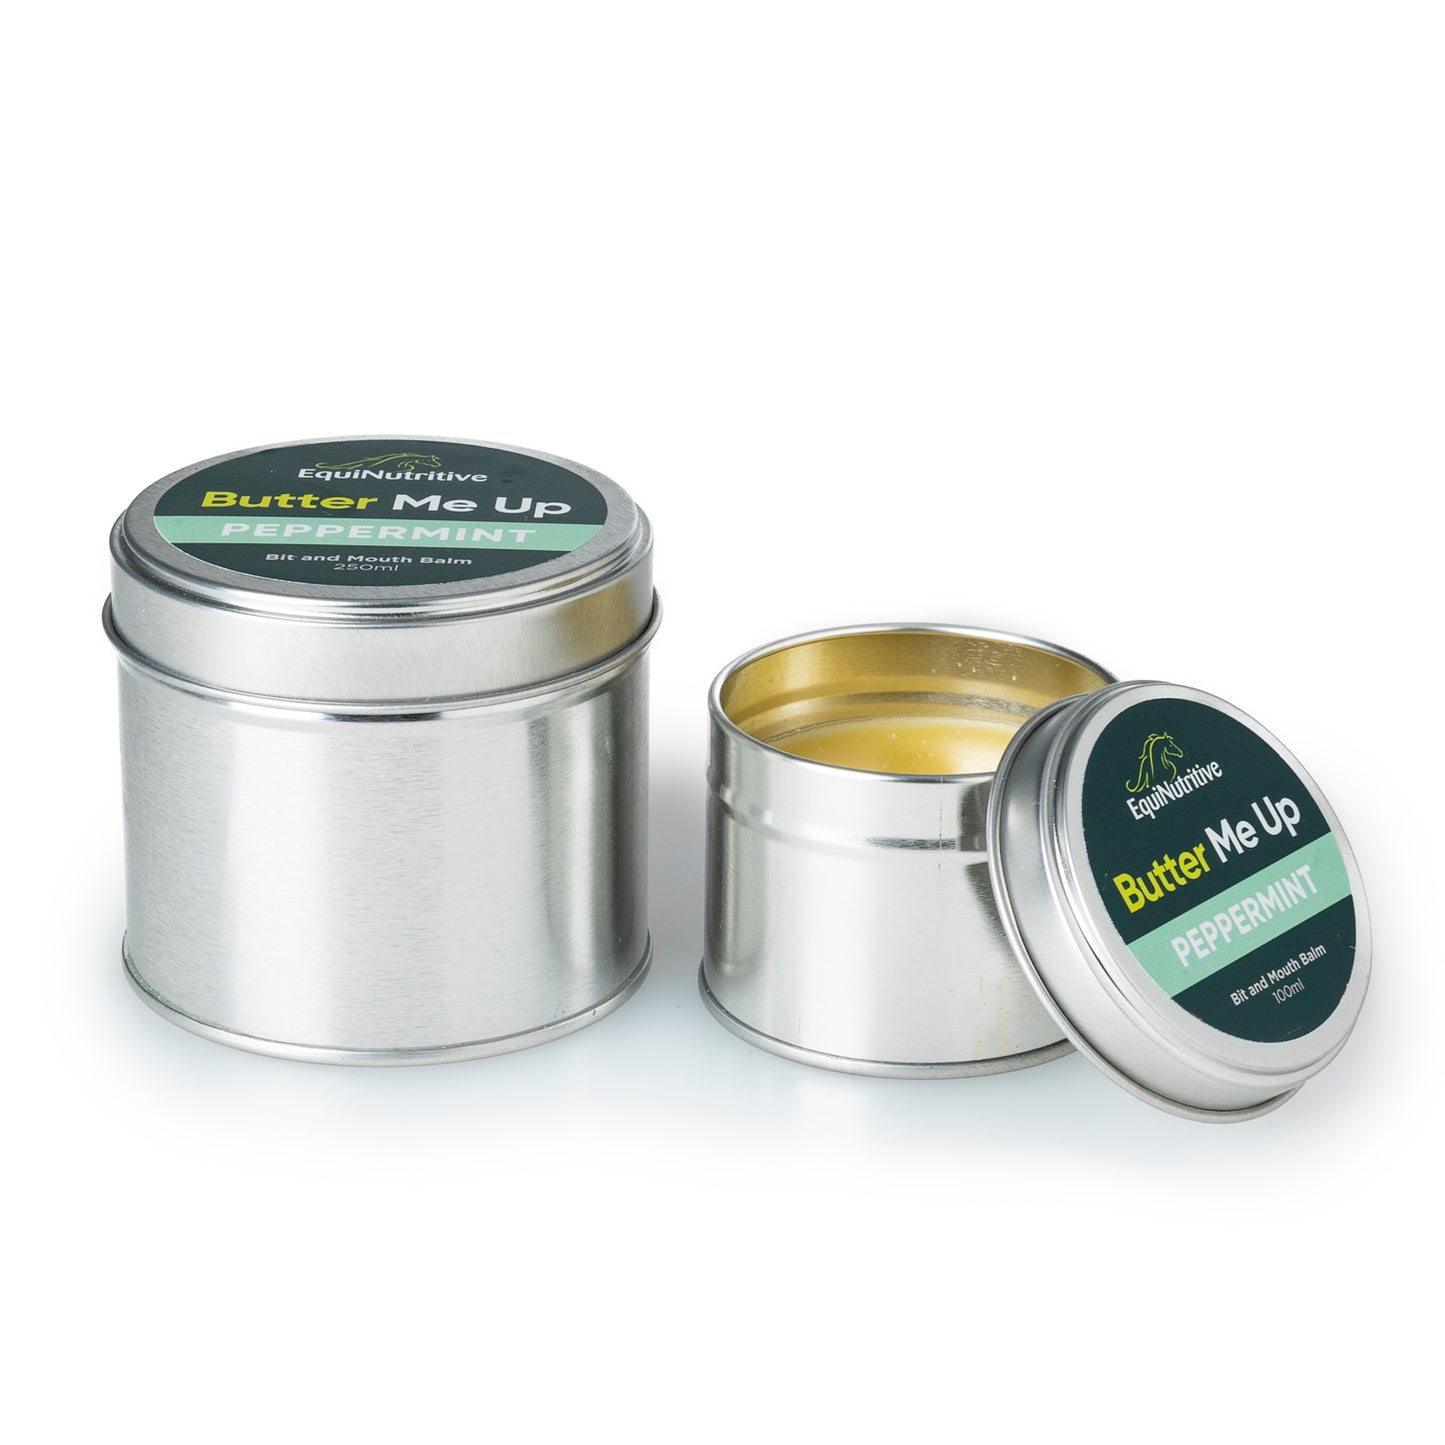 Butter me up - Bit and Mouth Balm